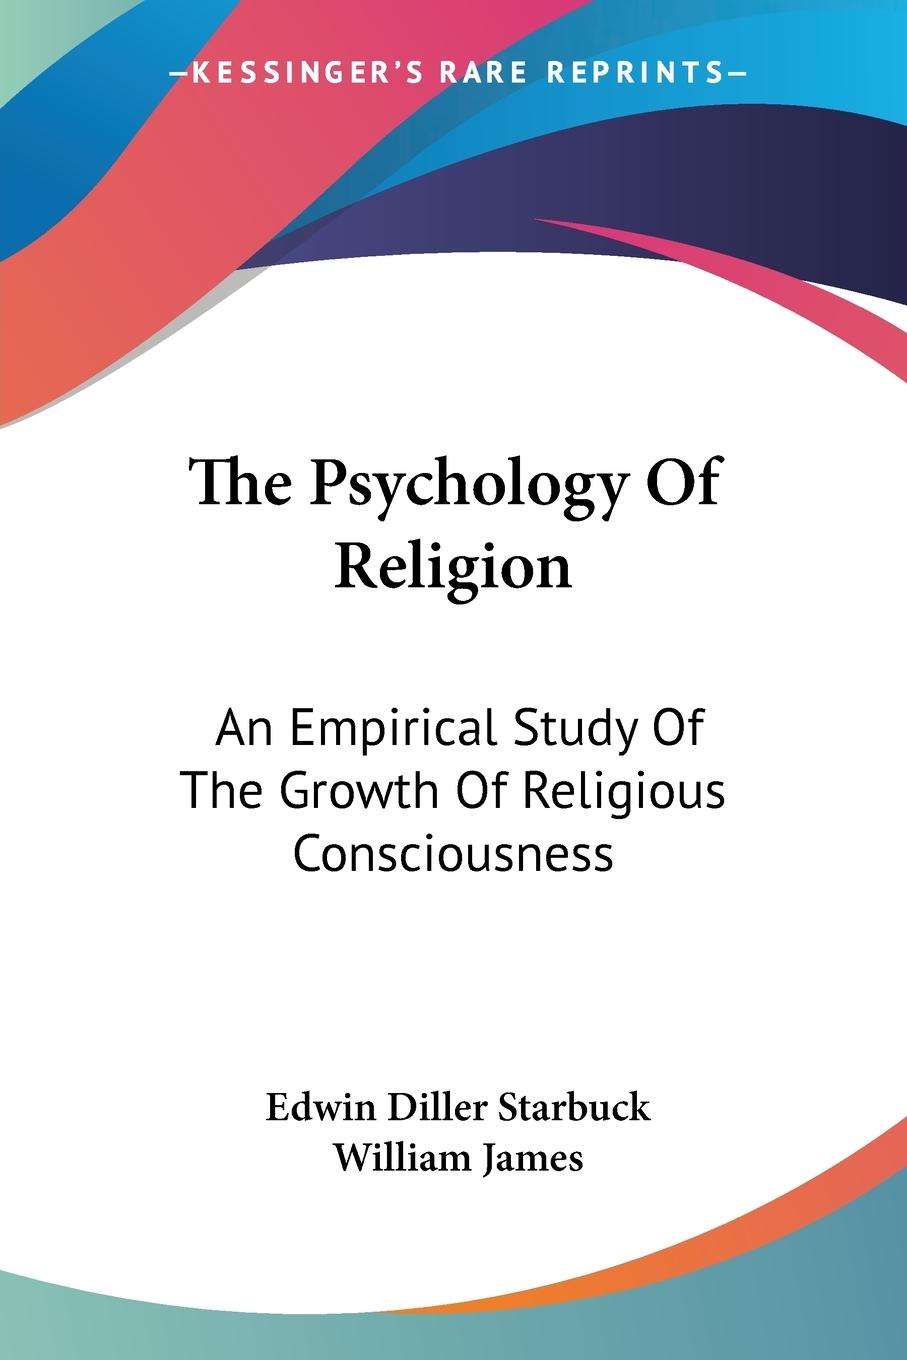 The Psychology Of Religion - Starbuck, Edwin Diller